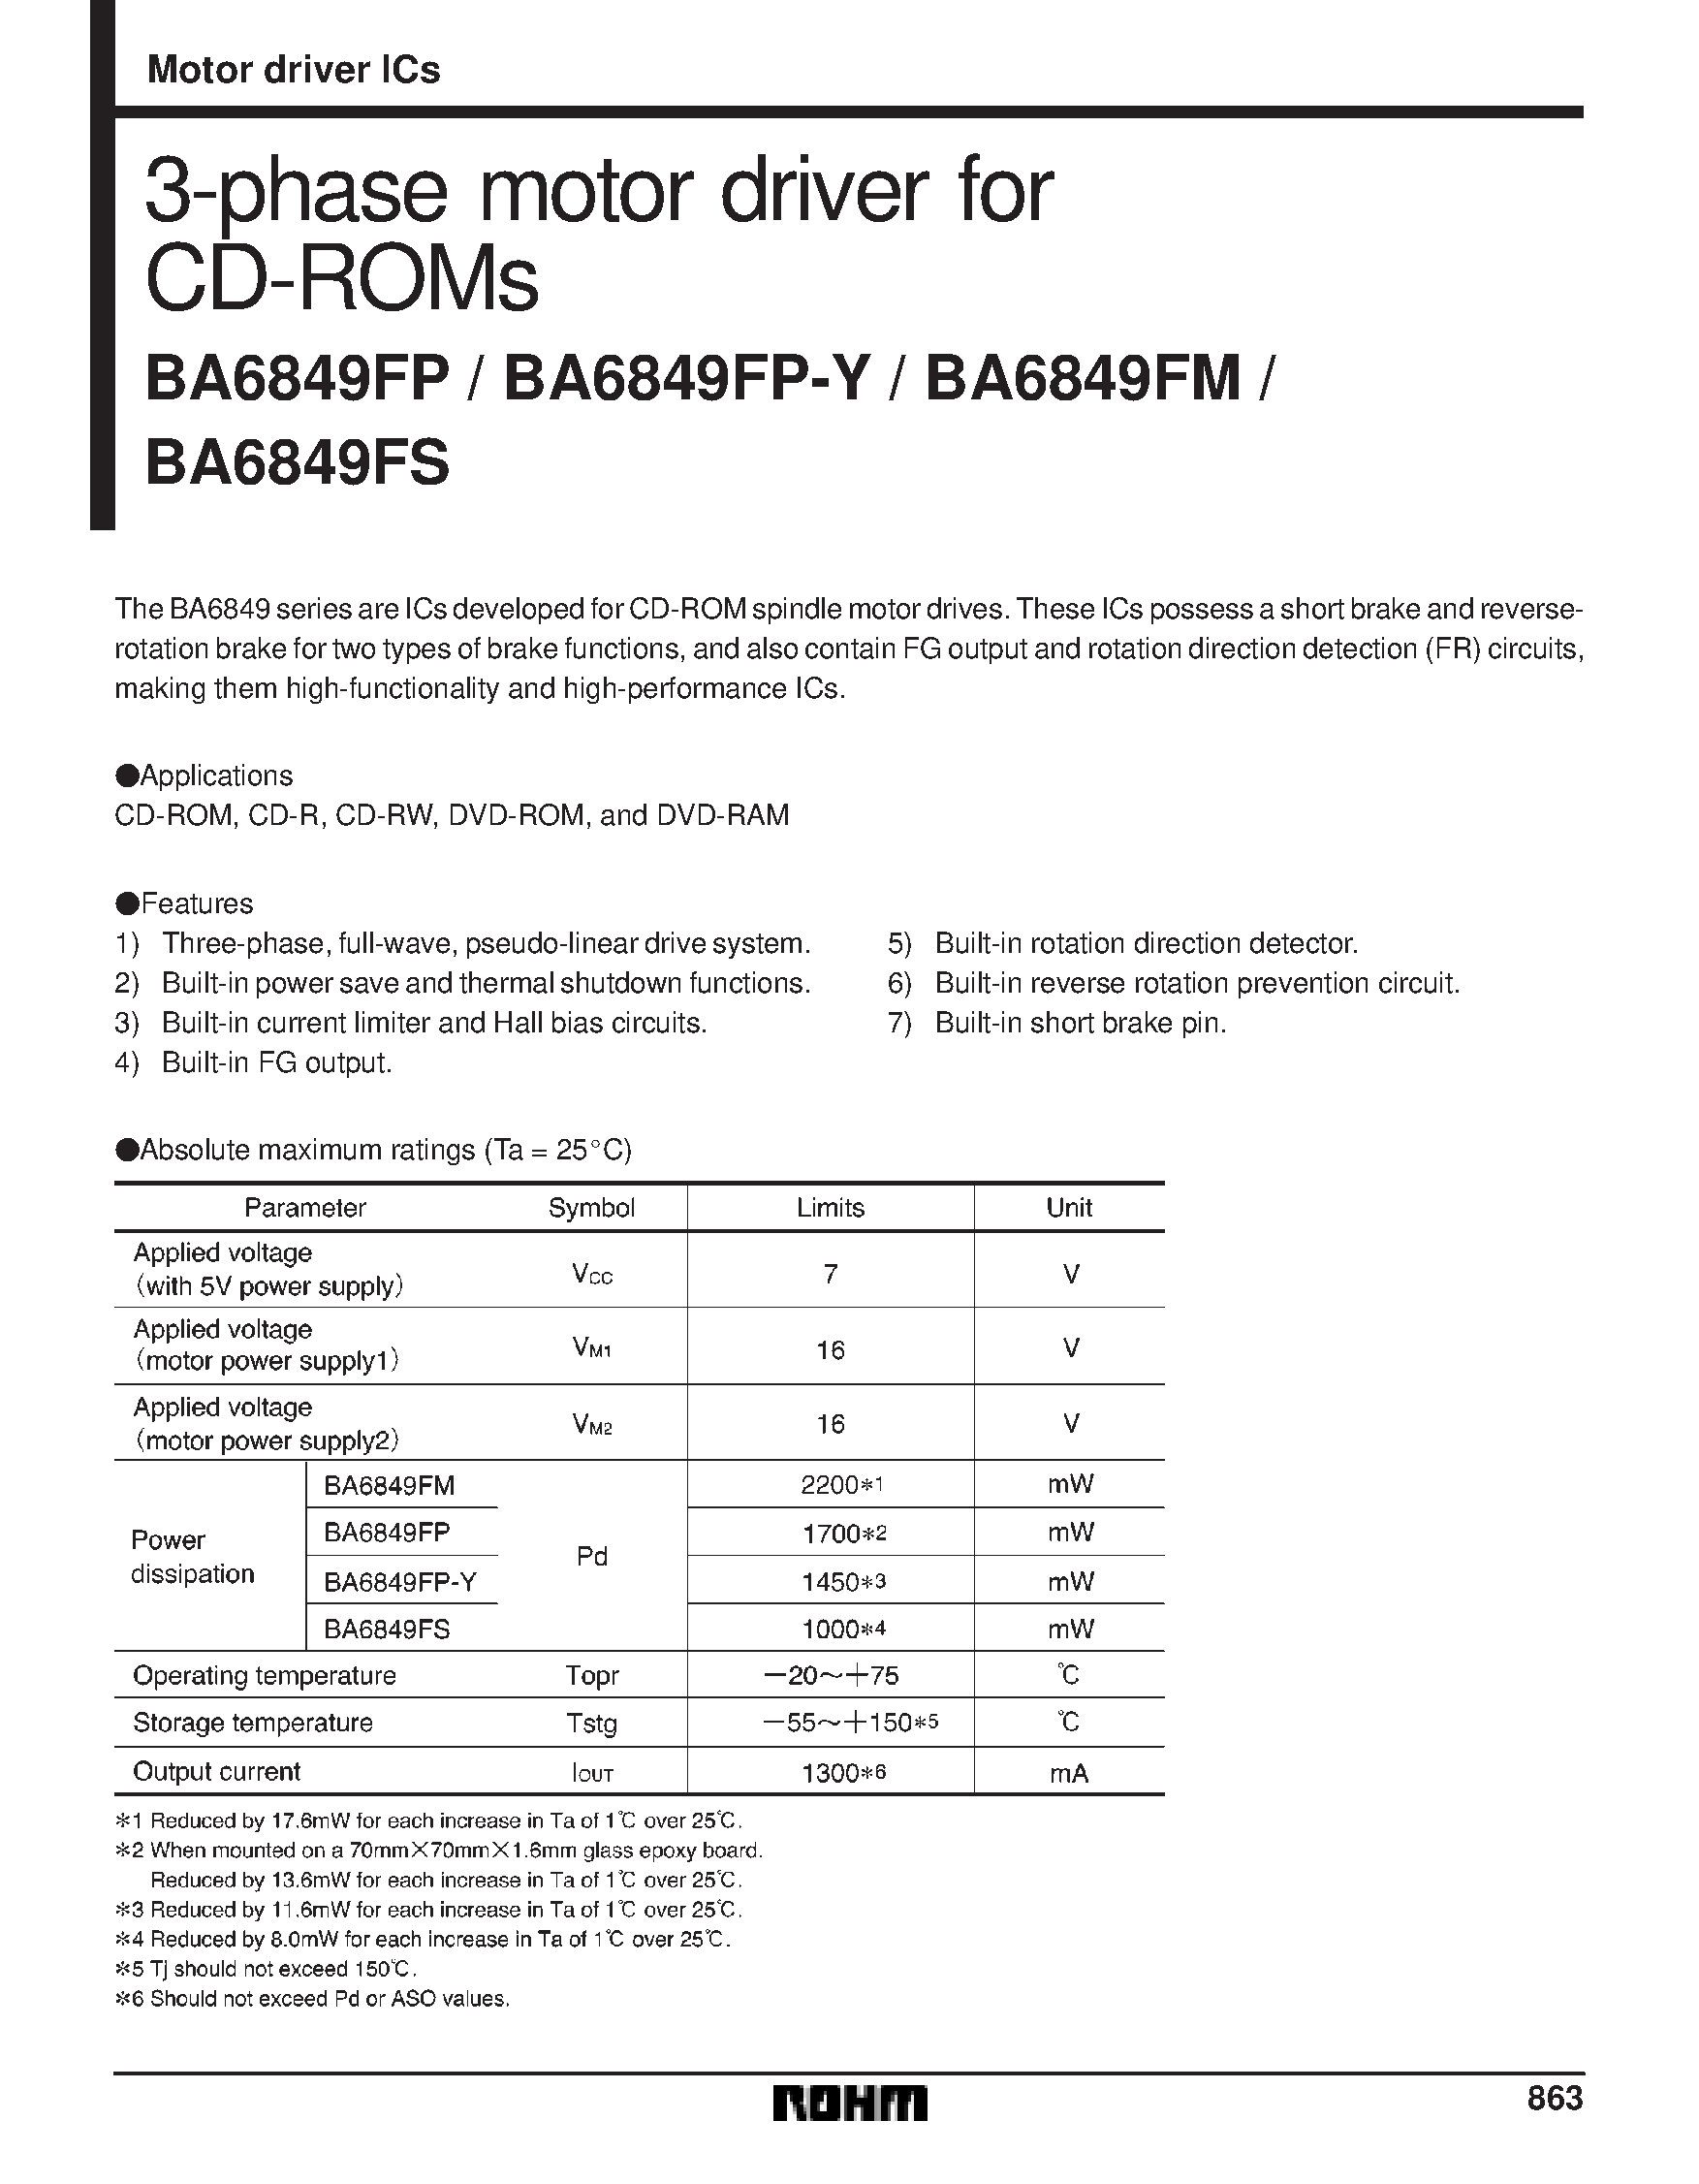 Datasheet BA6849FP-Y - 3-phase motor driver for CD-ROMs page 1